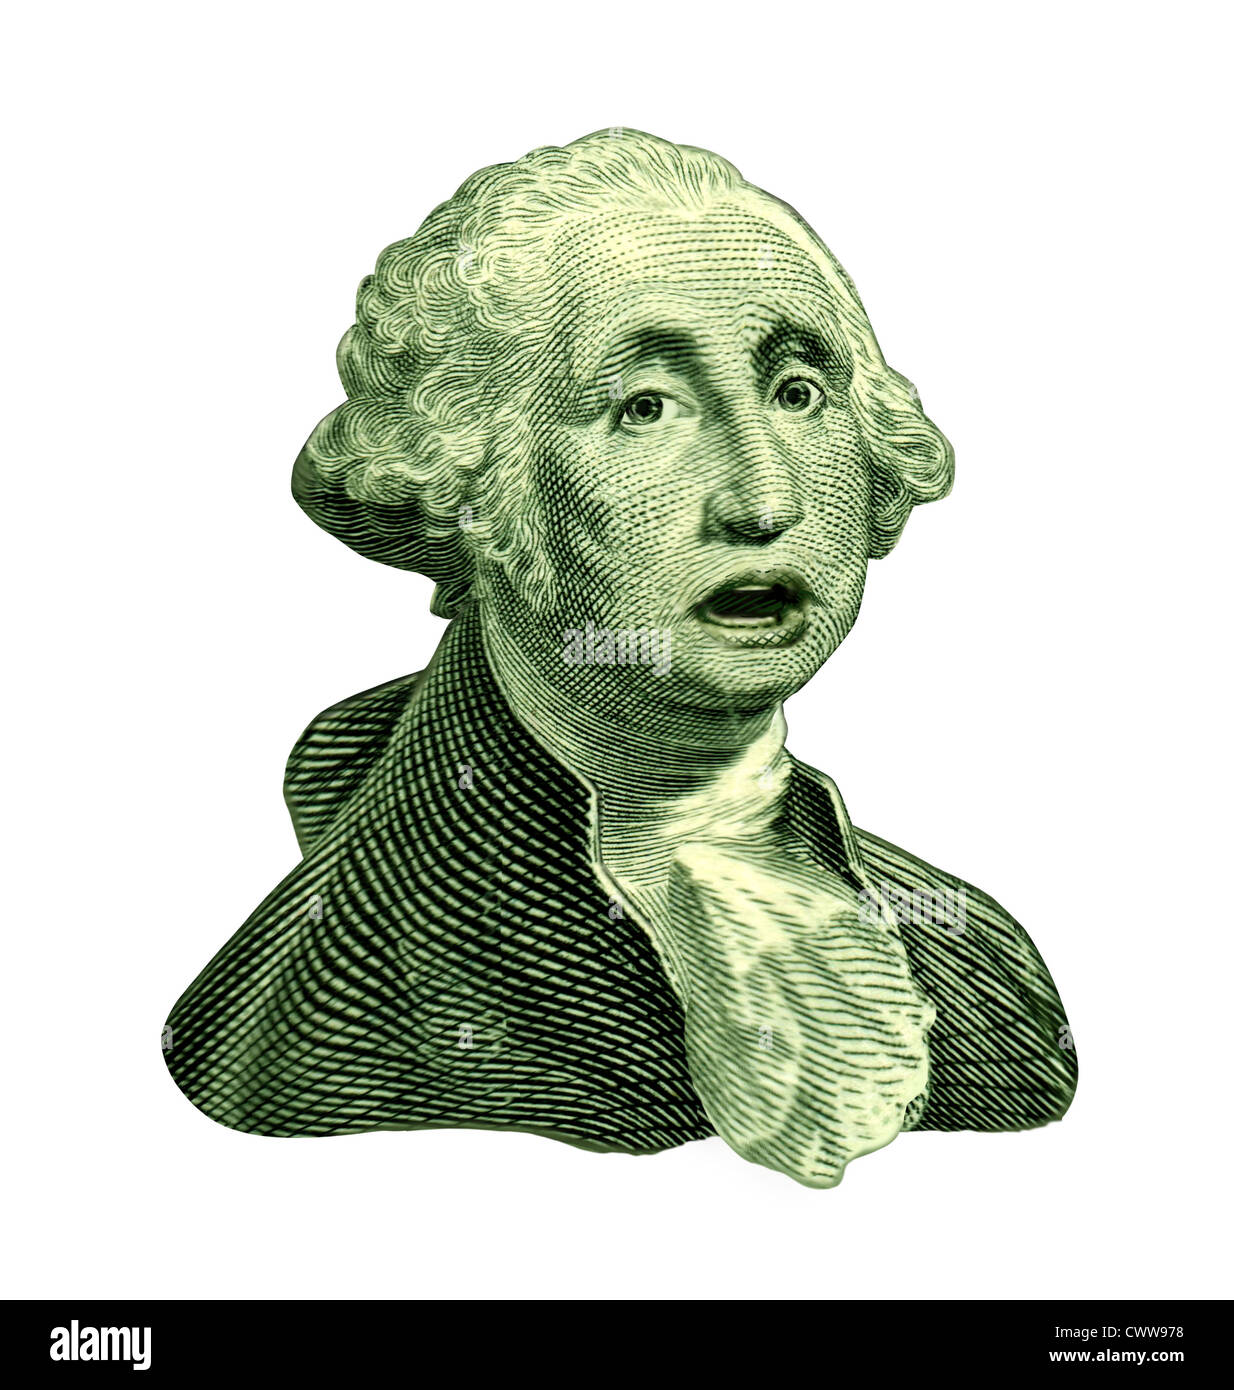 Direction of the U.S. dollar bill symbol featuring the vintage portrait of George Washington with a talking expresion showing concern for the downgraded American currency during a dangerous recesion and U.S. economy. Stock Photo